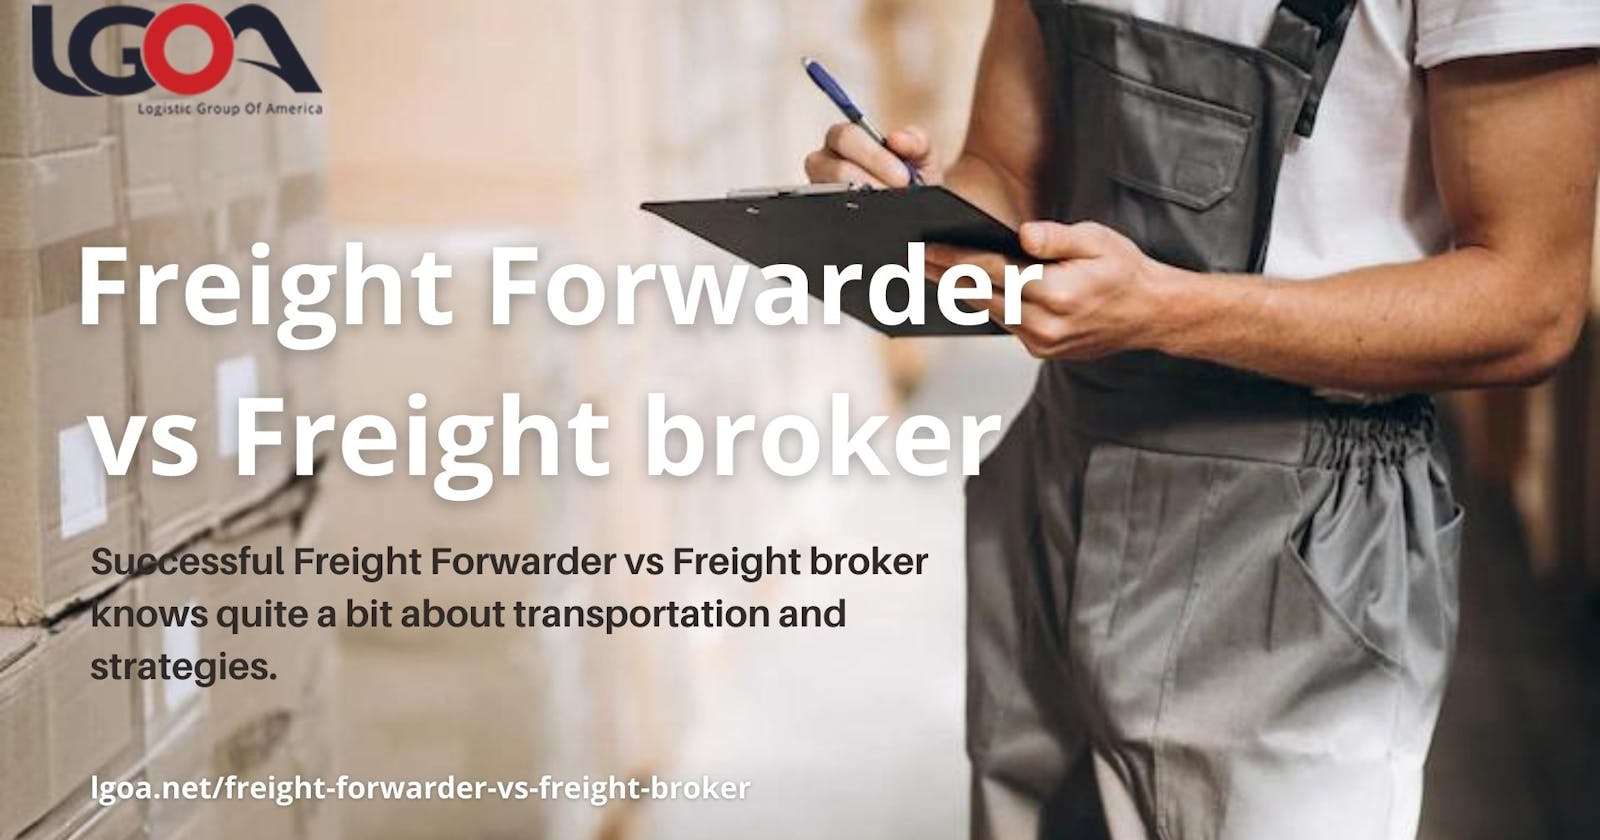 Freight Forwarder vs Freight broker: What's the Difference?